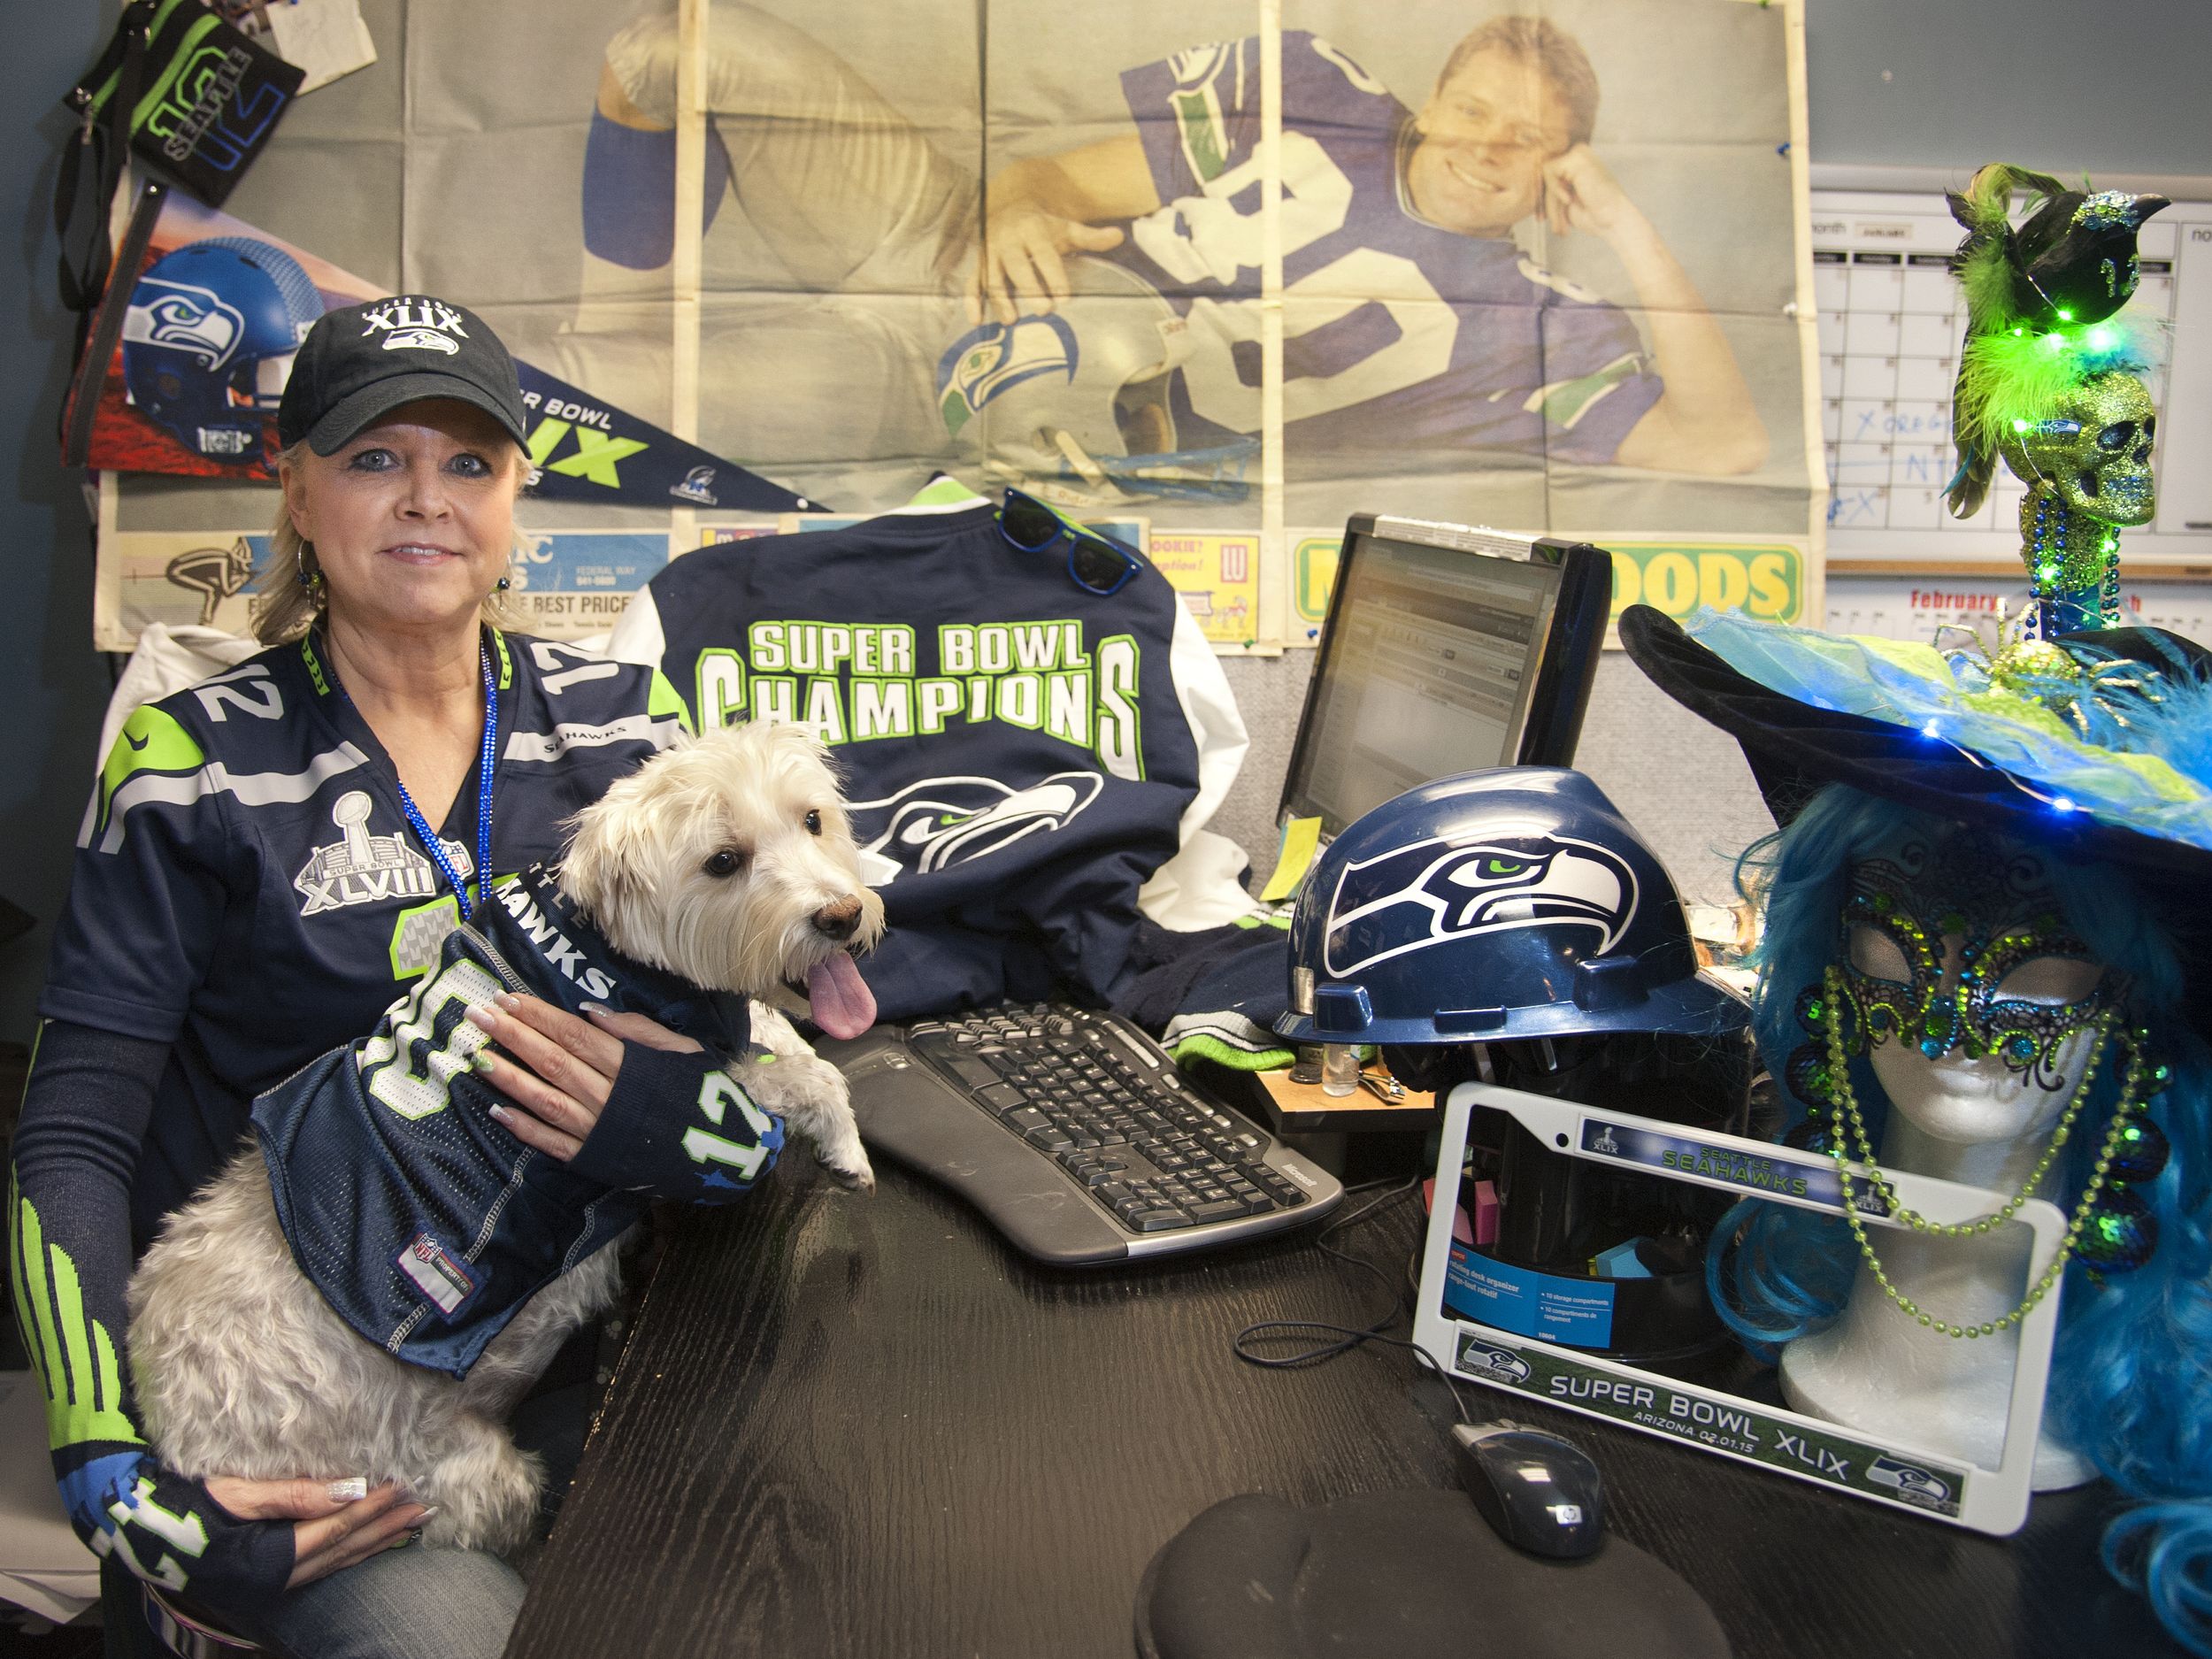 Seahawks Superfans: Mr. and Mrs. Seahawk